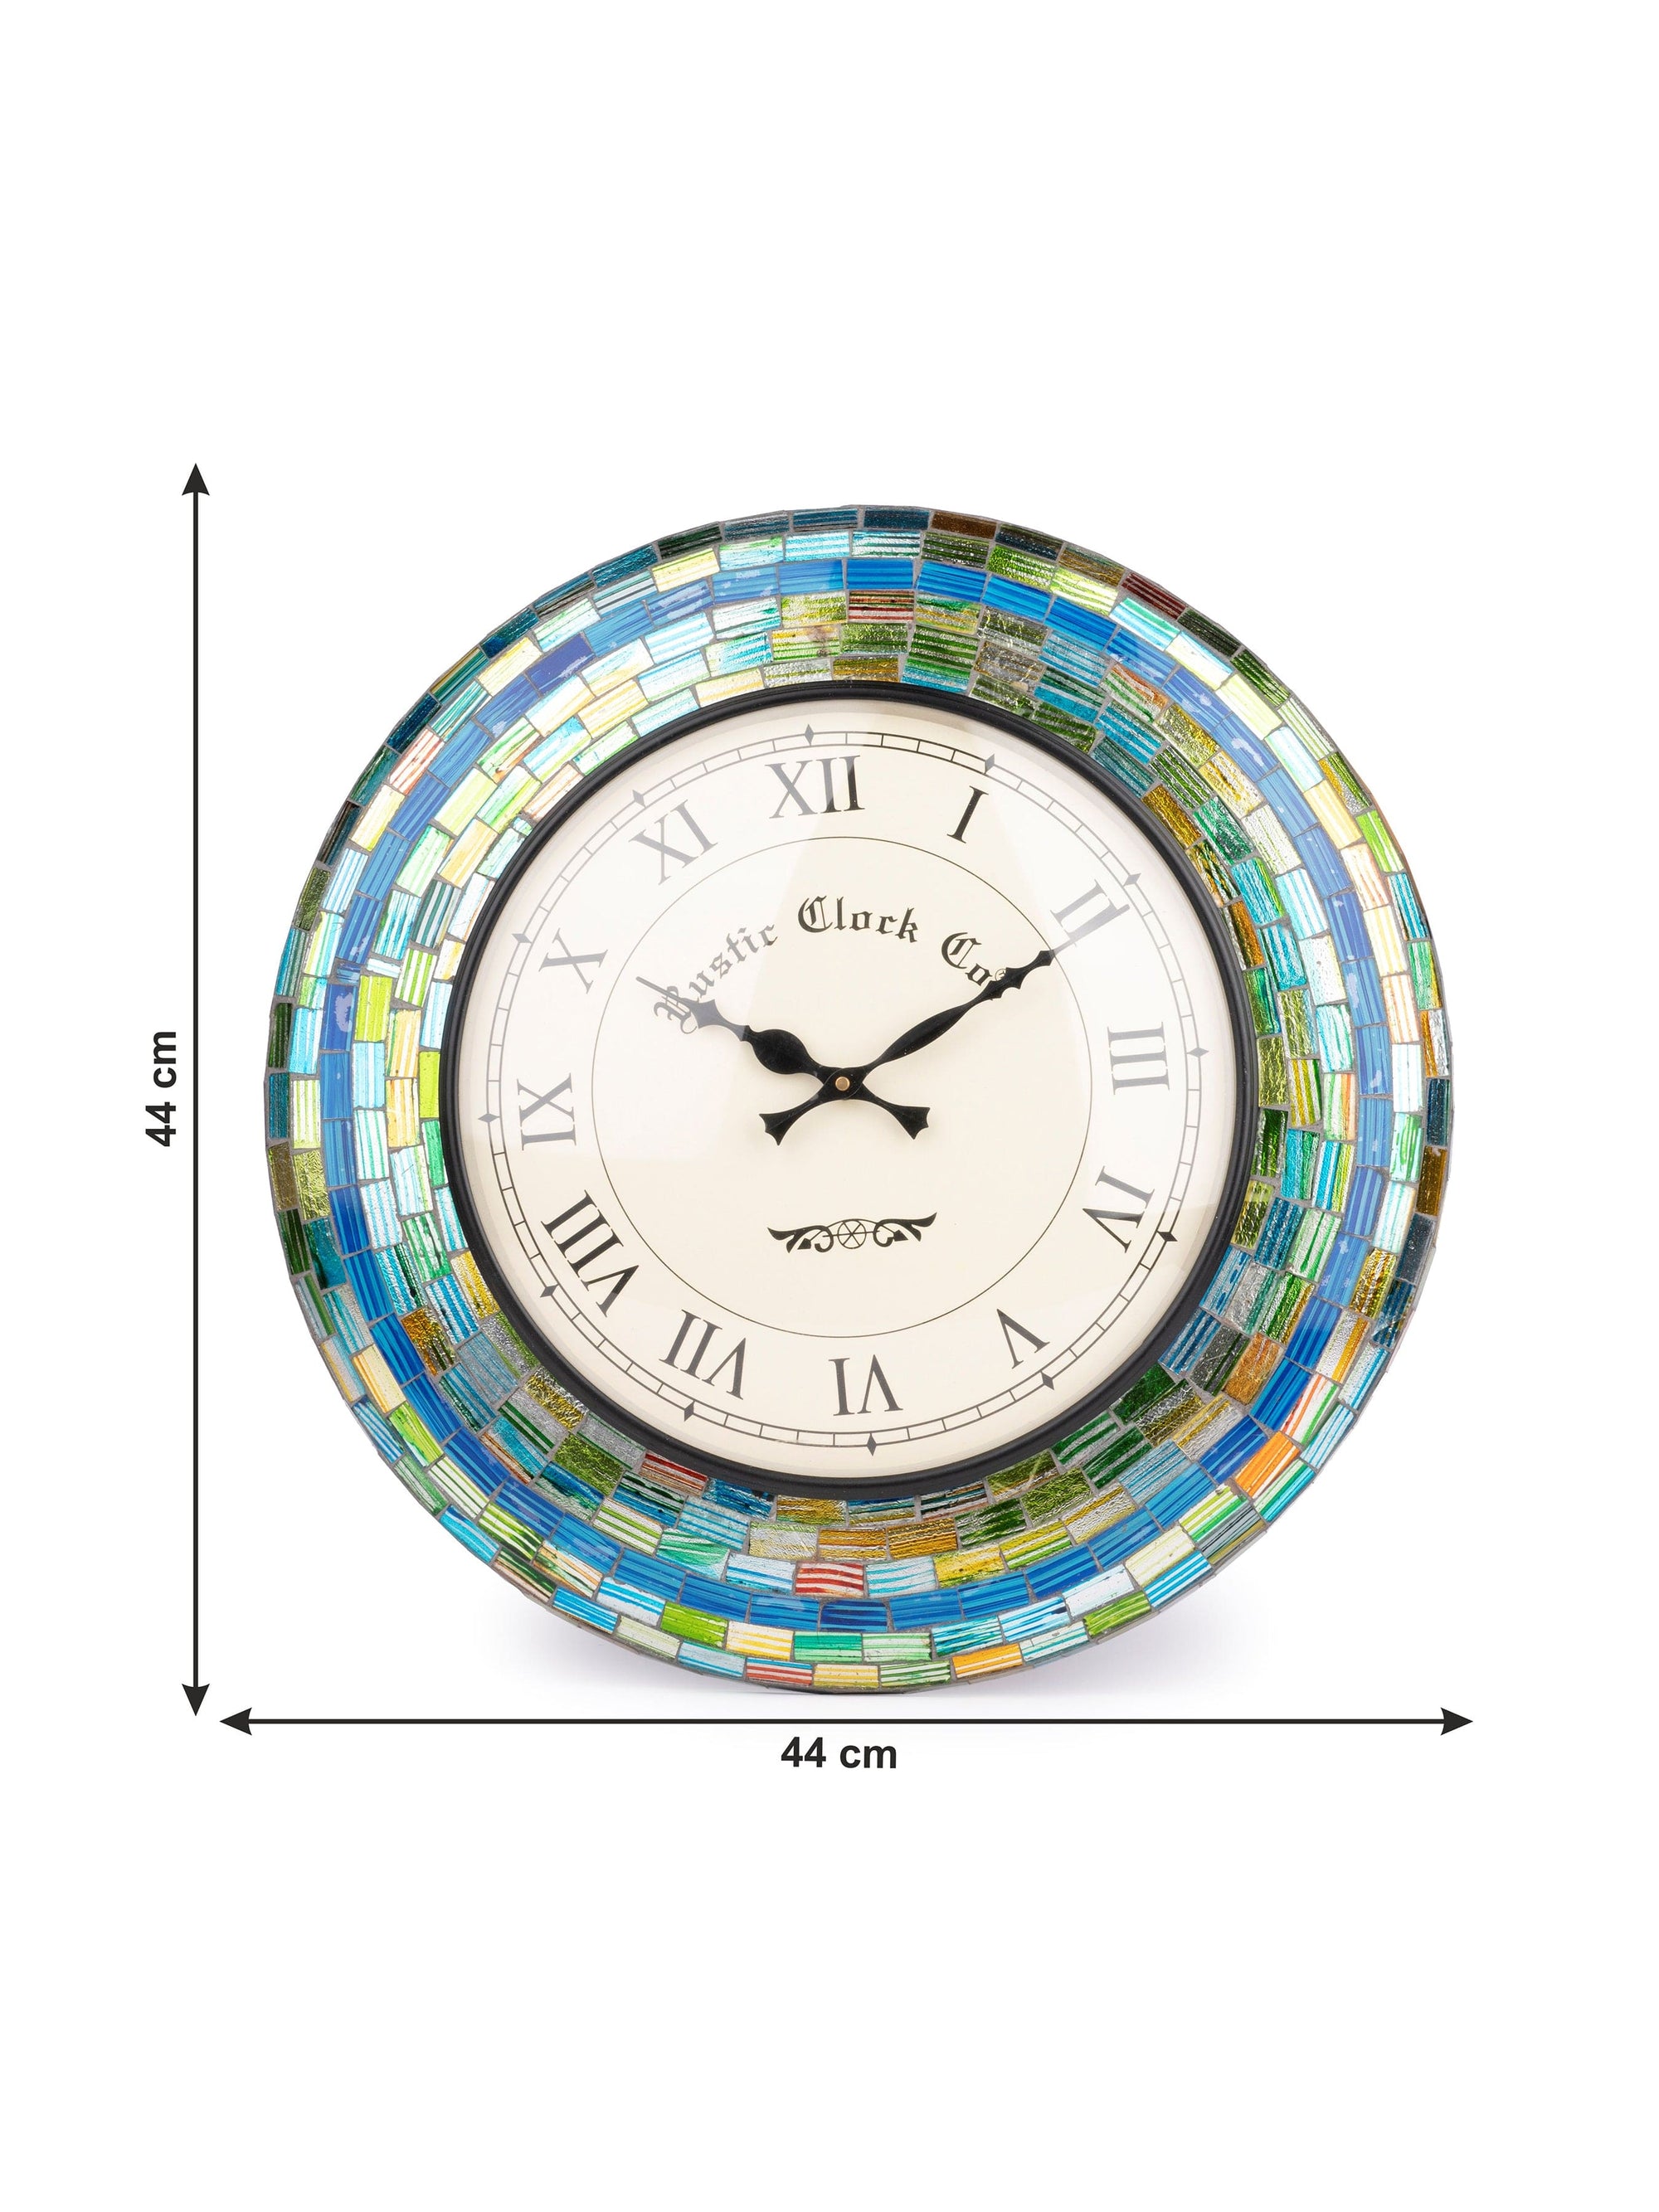 Colorful Rainbow Glass Analogue Wall Clock - 17 inches dia - The Heritage Artifacts